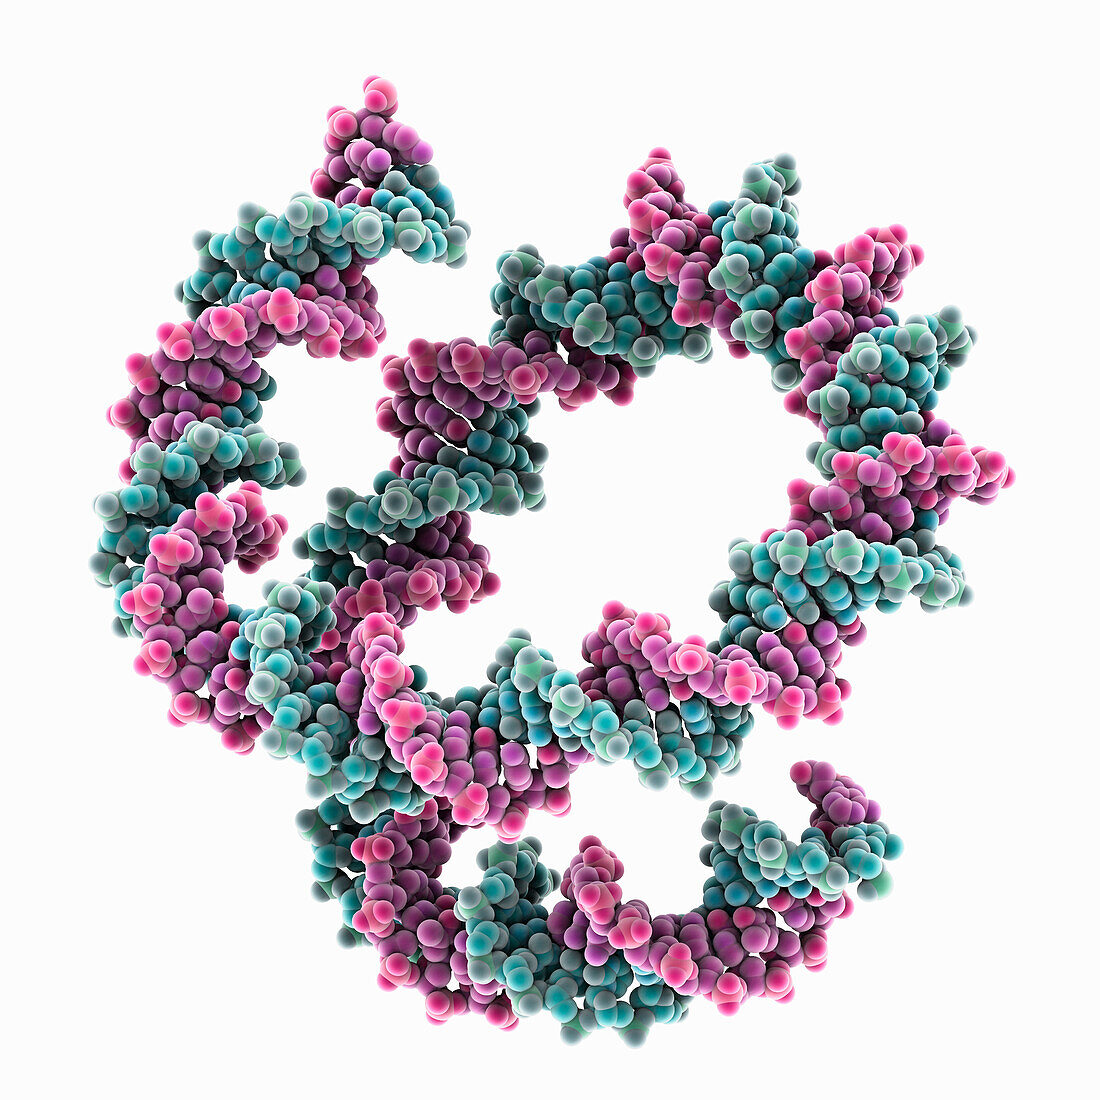 Nucleosome without histones, molecular model